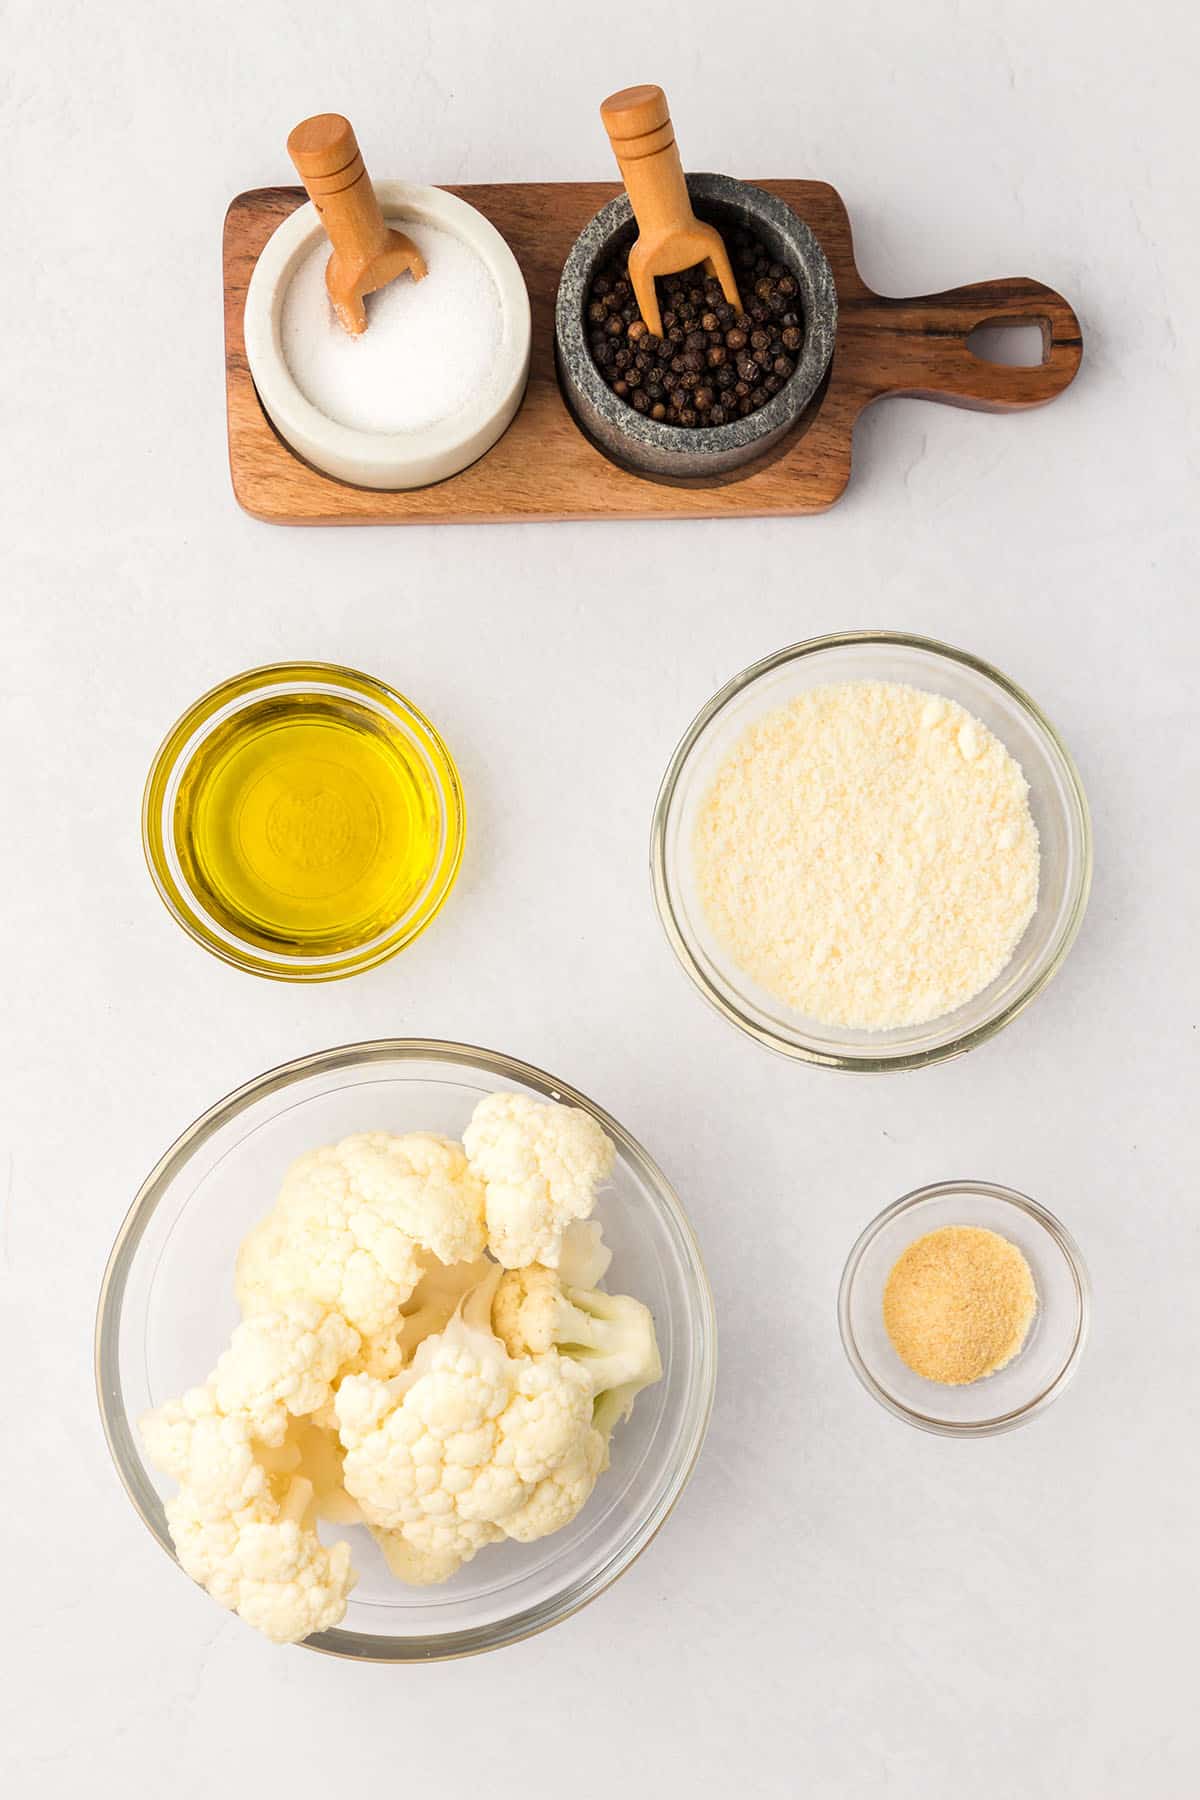 photo of ingredients needed to make cauliflower in the oven roasted